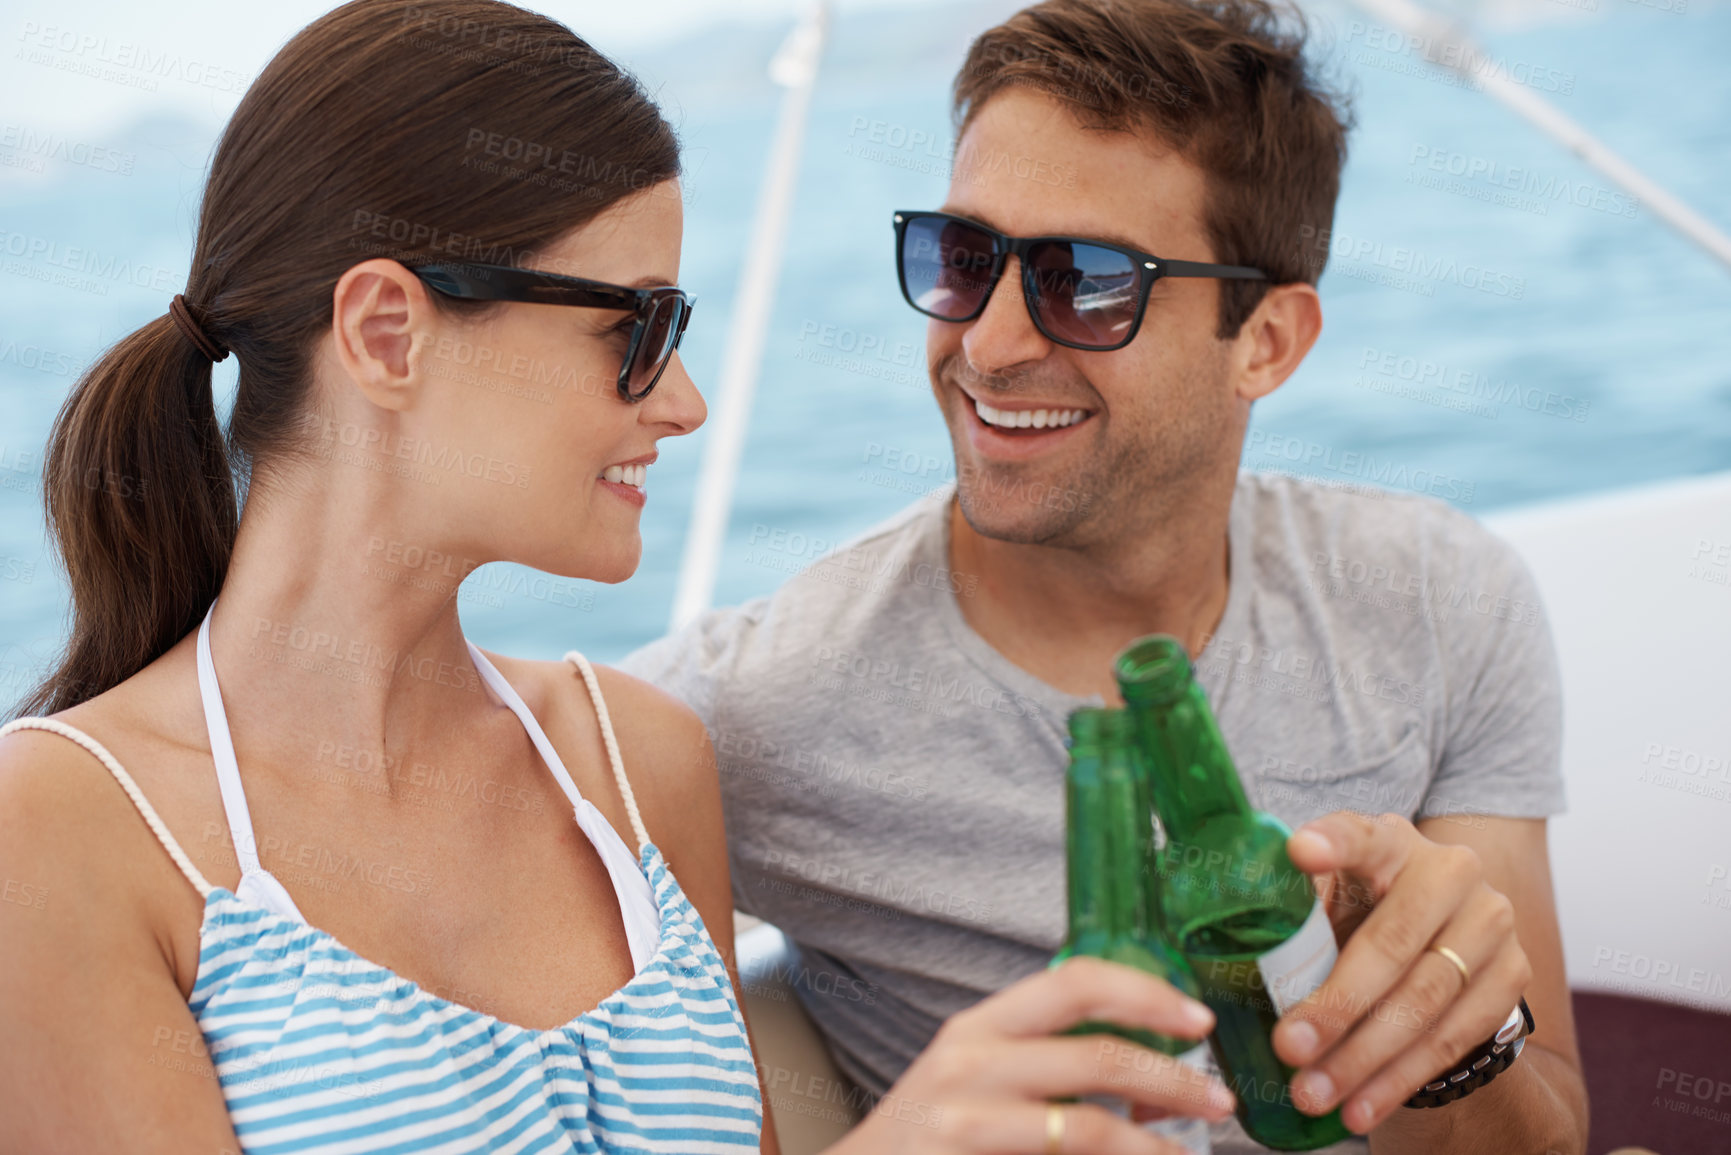 Buy stock photo Smile, couple and toast with alcohol on yacht at sea in celebration of vacation, travel or summer holiday on ship. Man, woman or cheers with beer on boat outdoor for journey, cruise or drink at party